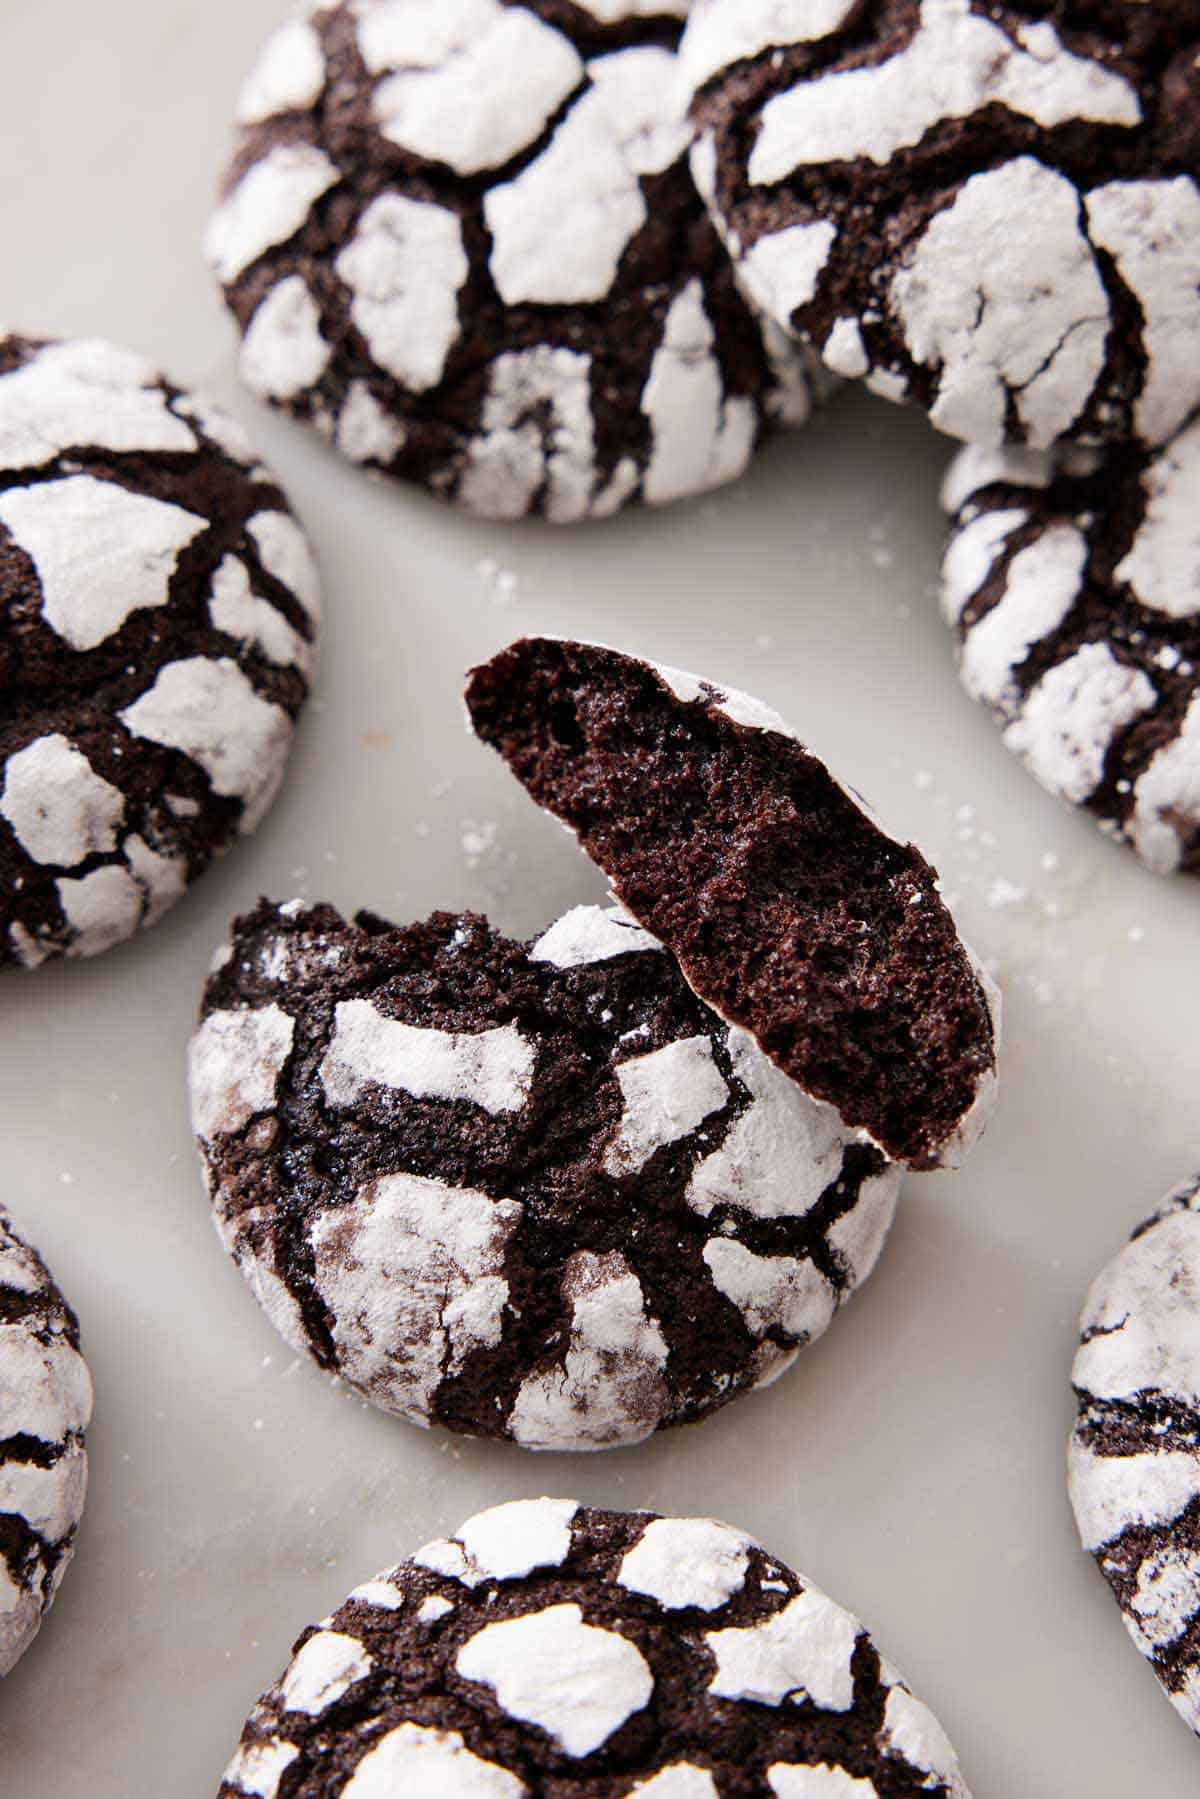 Chocolate crinkle cookies scattered on a marble surface with the one in the middle broke in half, showing the interior.